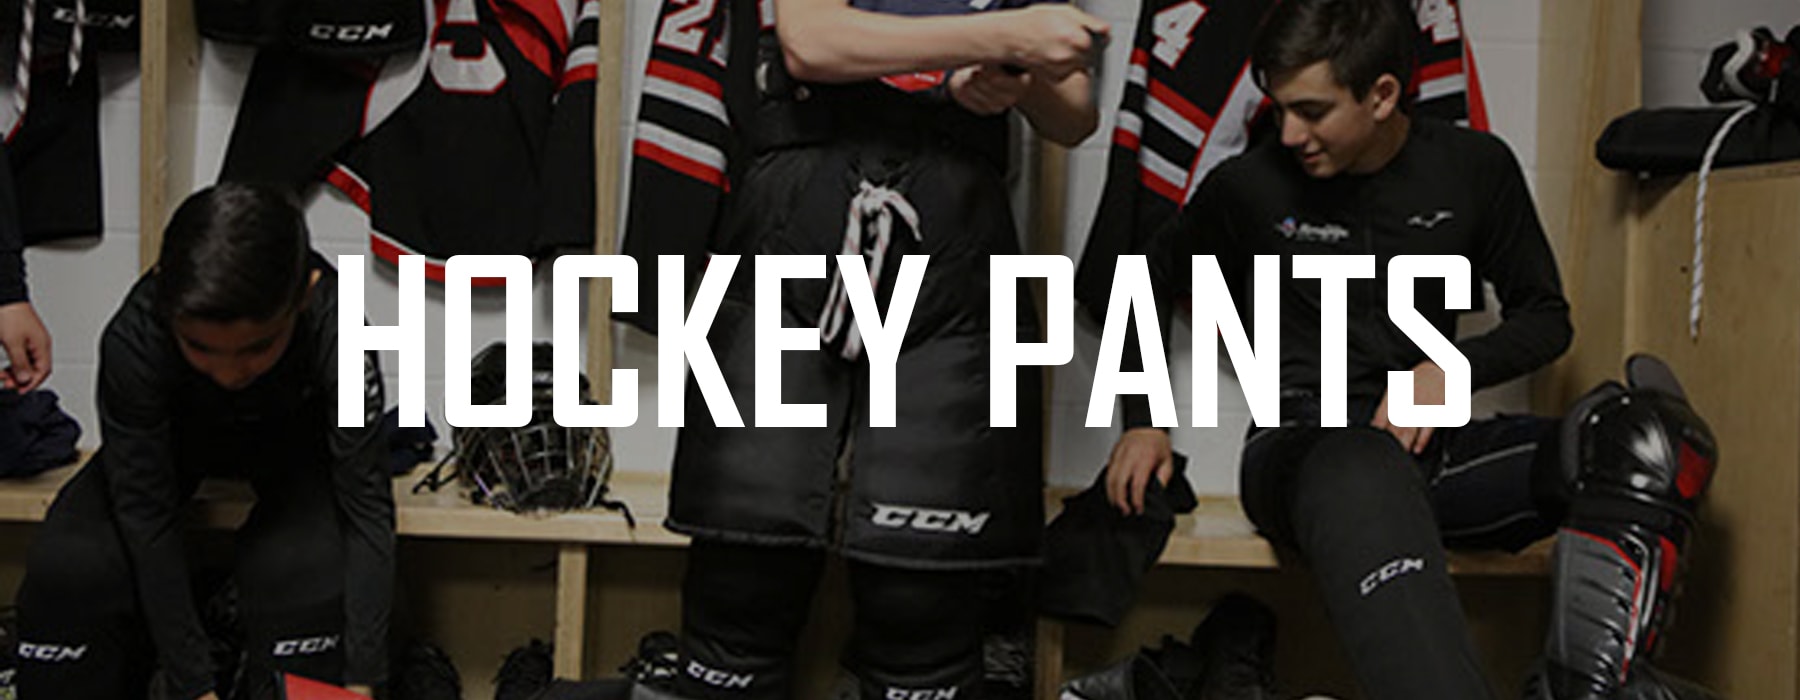 Hockey Pants For Sale Online and In Store Pro Hockey Life